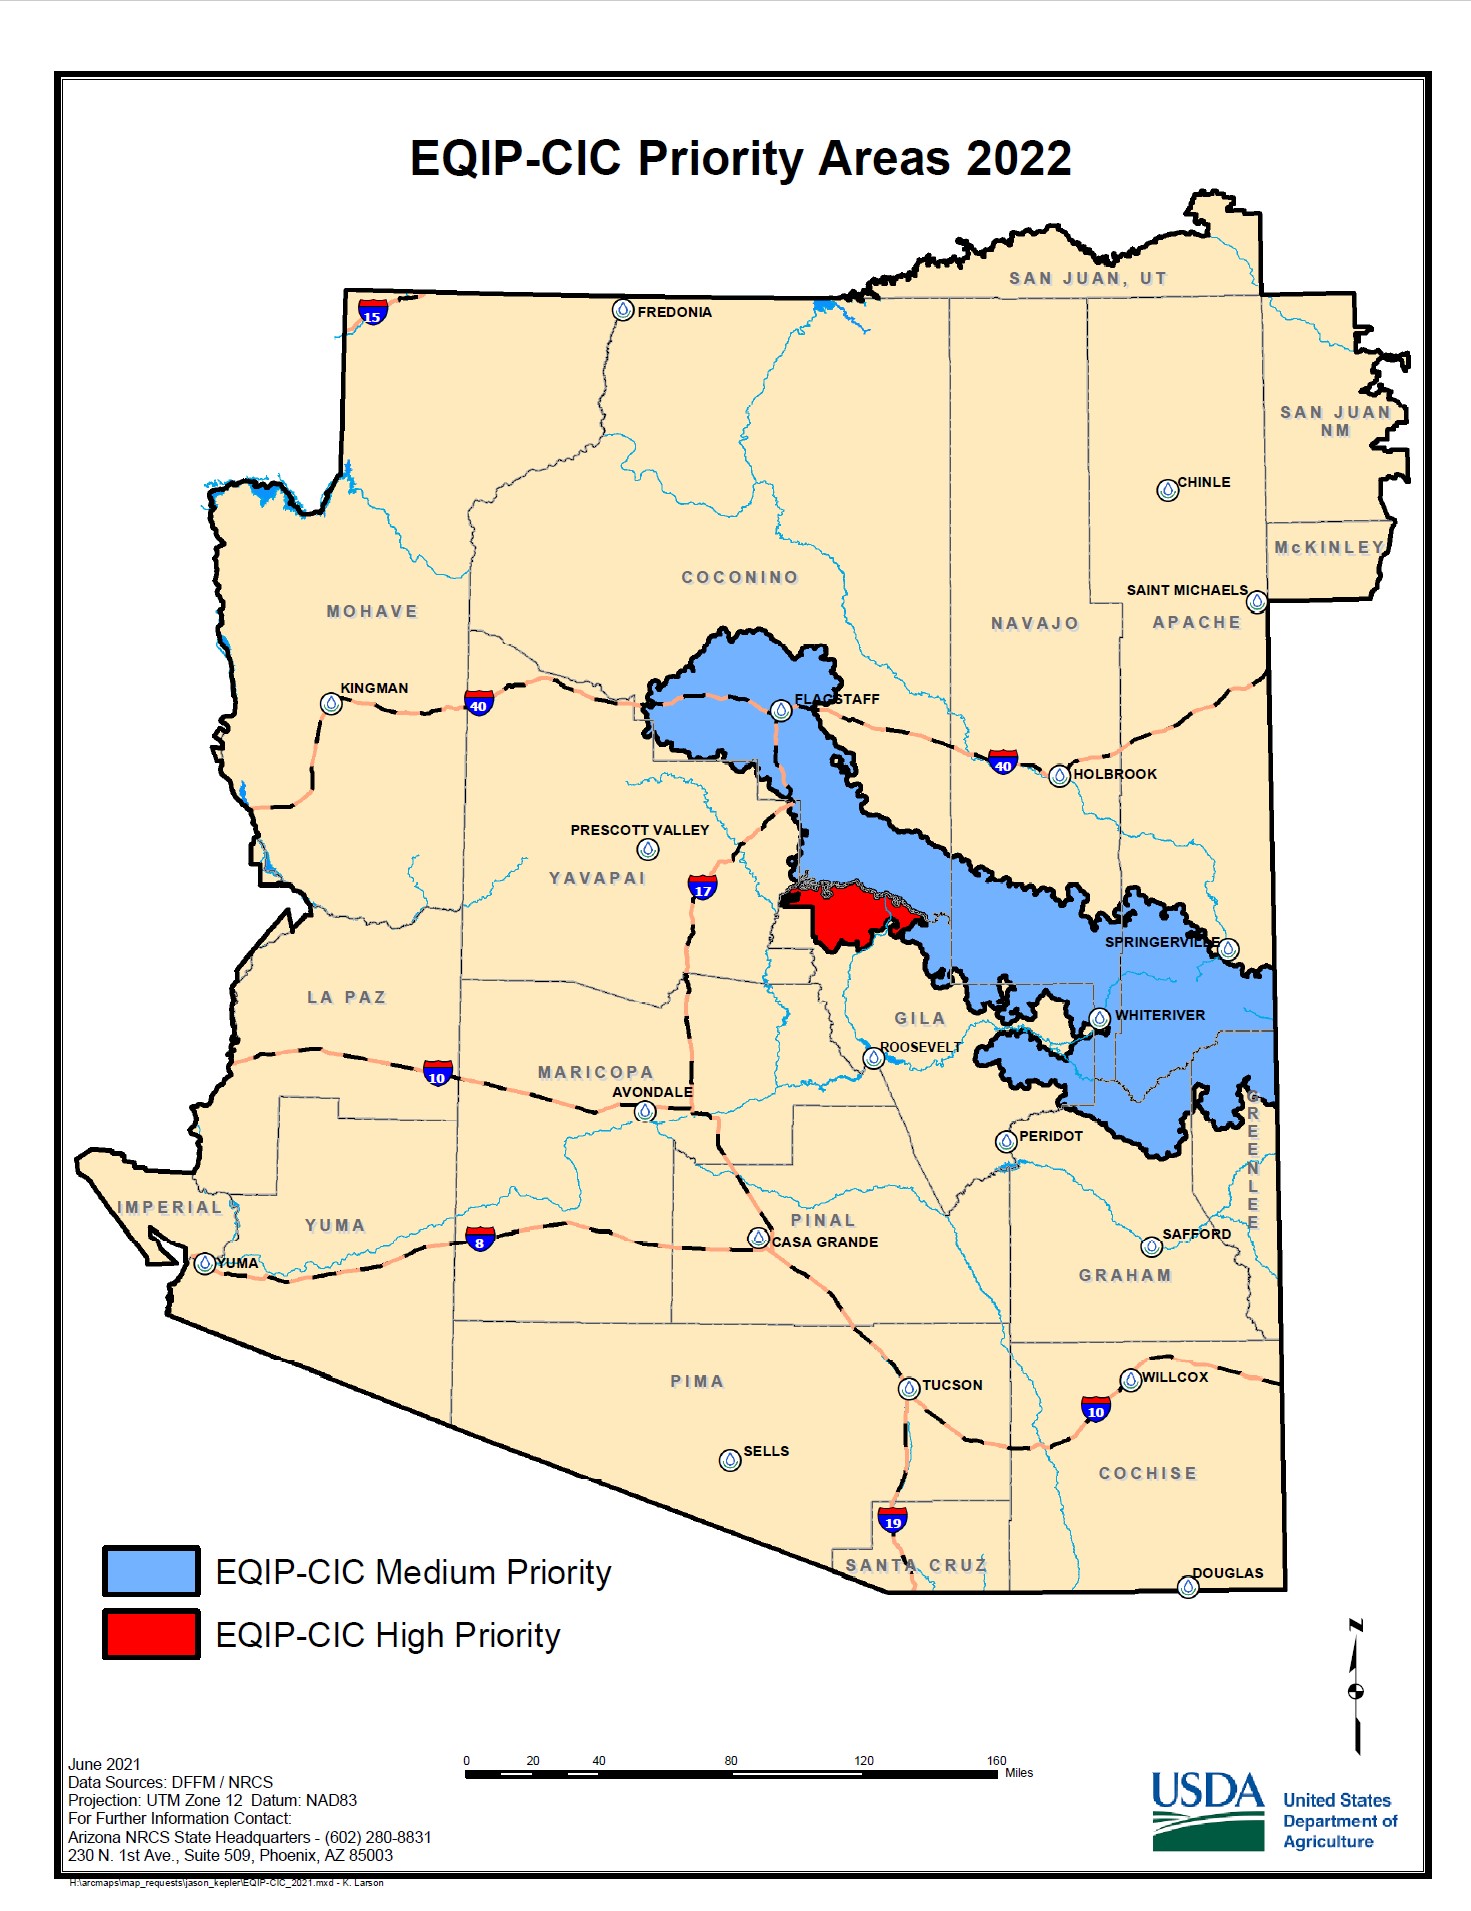 Arizona map identifying the EQIP-CIC Priority Areas for 2022